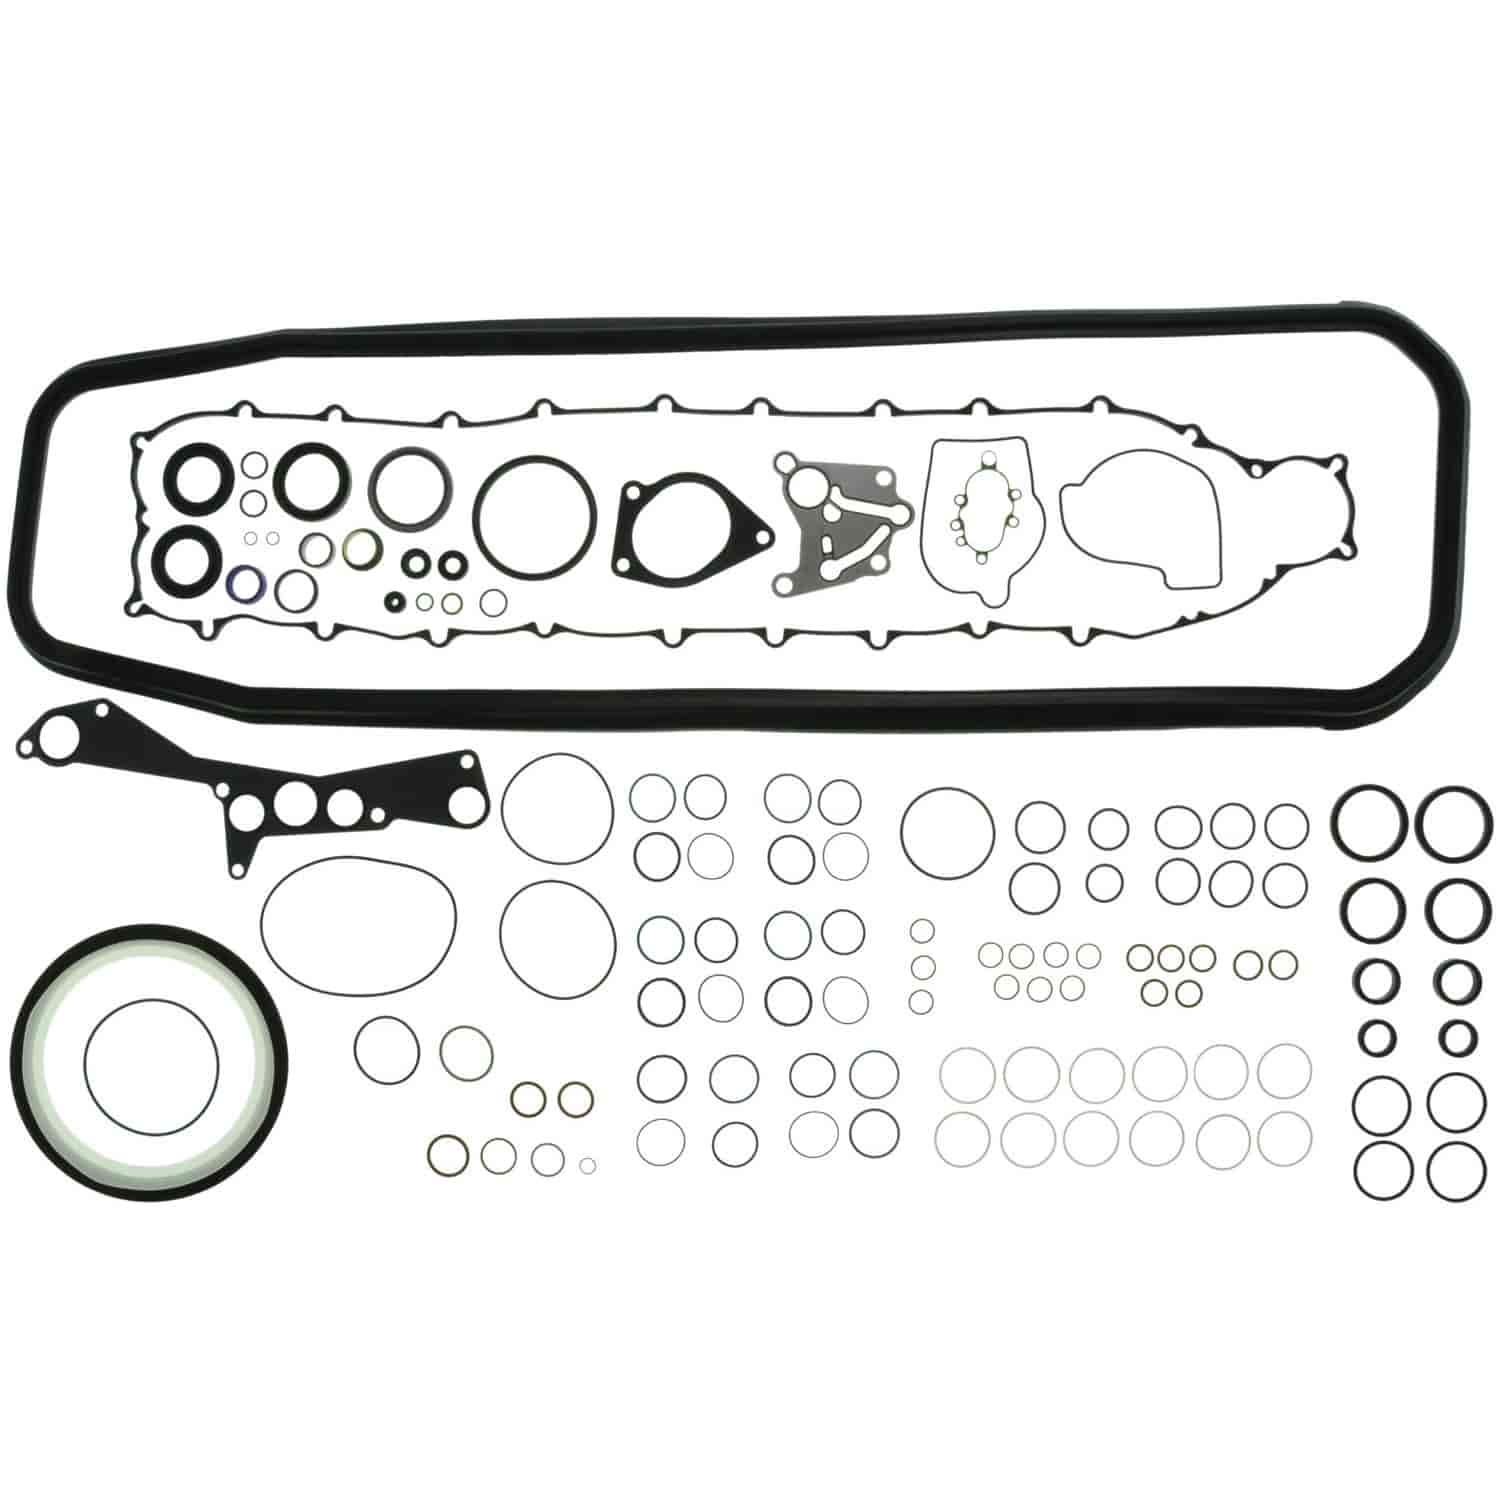 Conversion Set Volvo D12A Engines Lower Gasket Set Contains Rear Main Seal